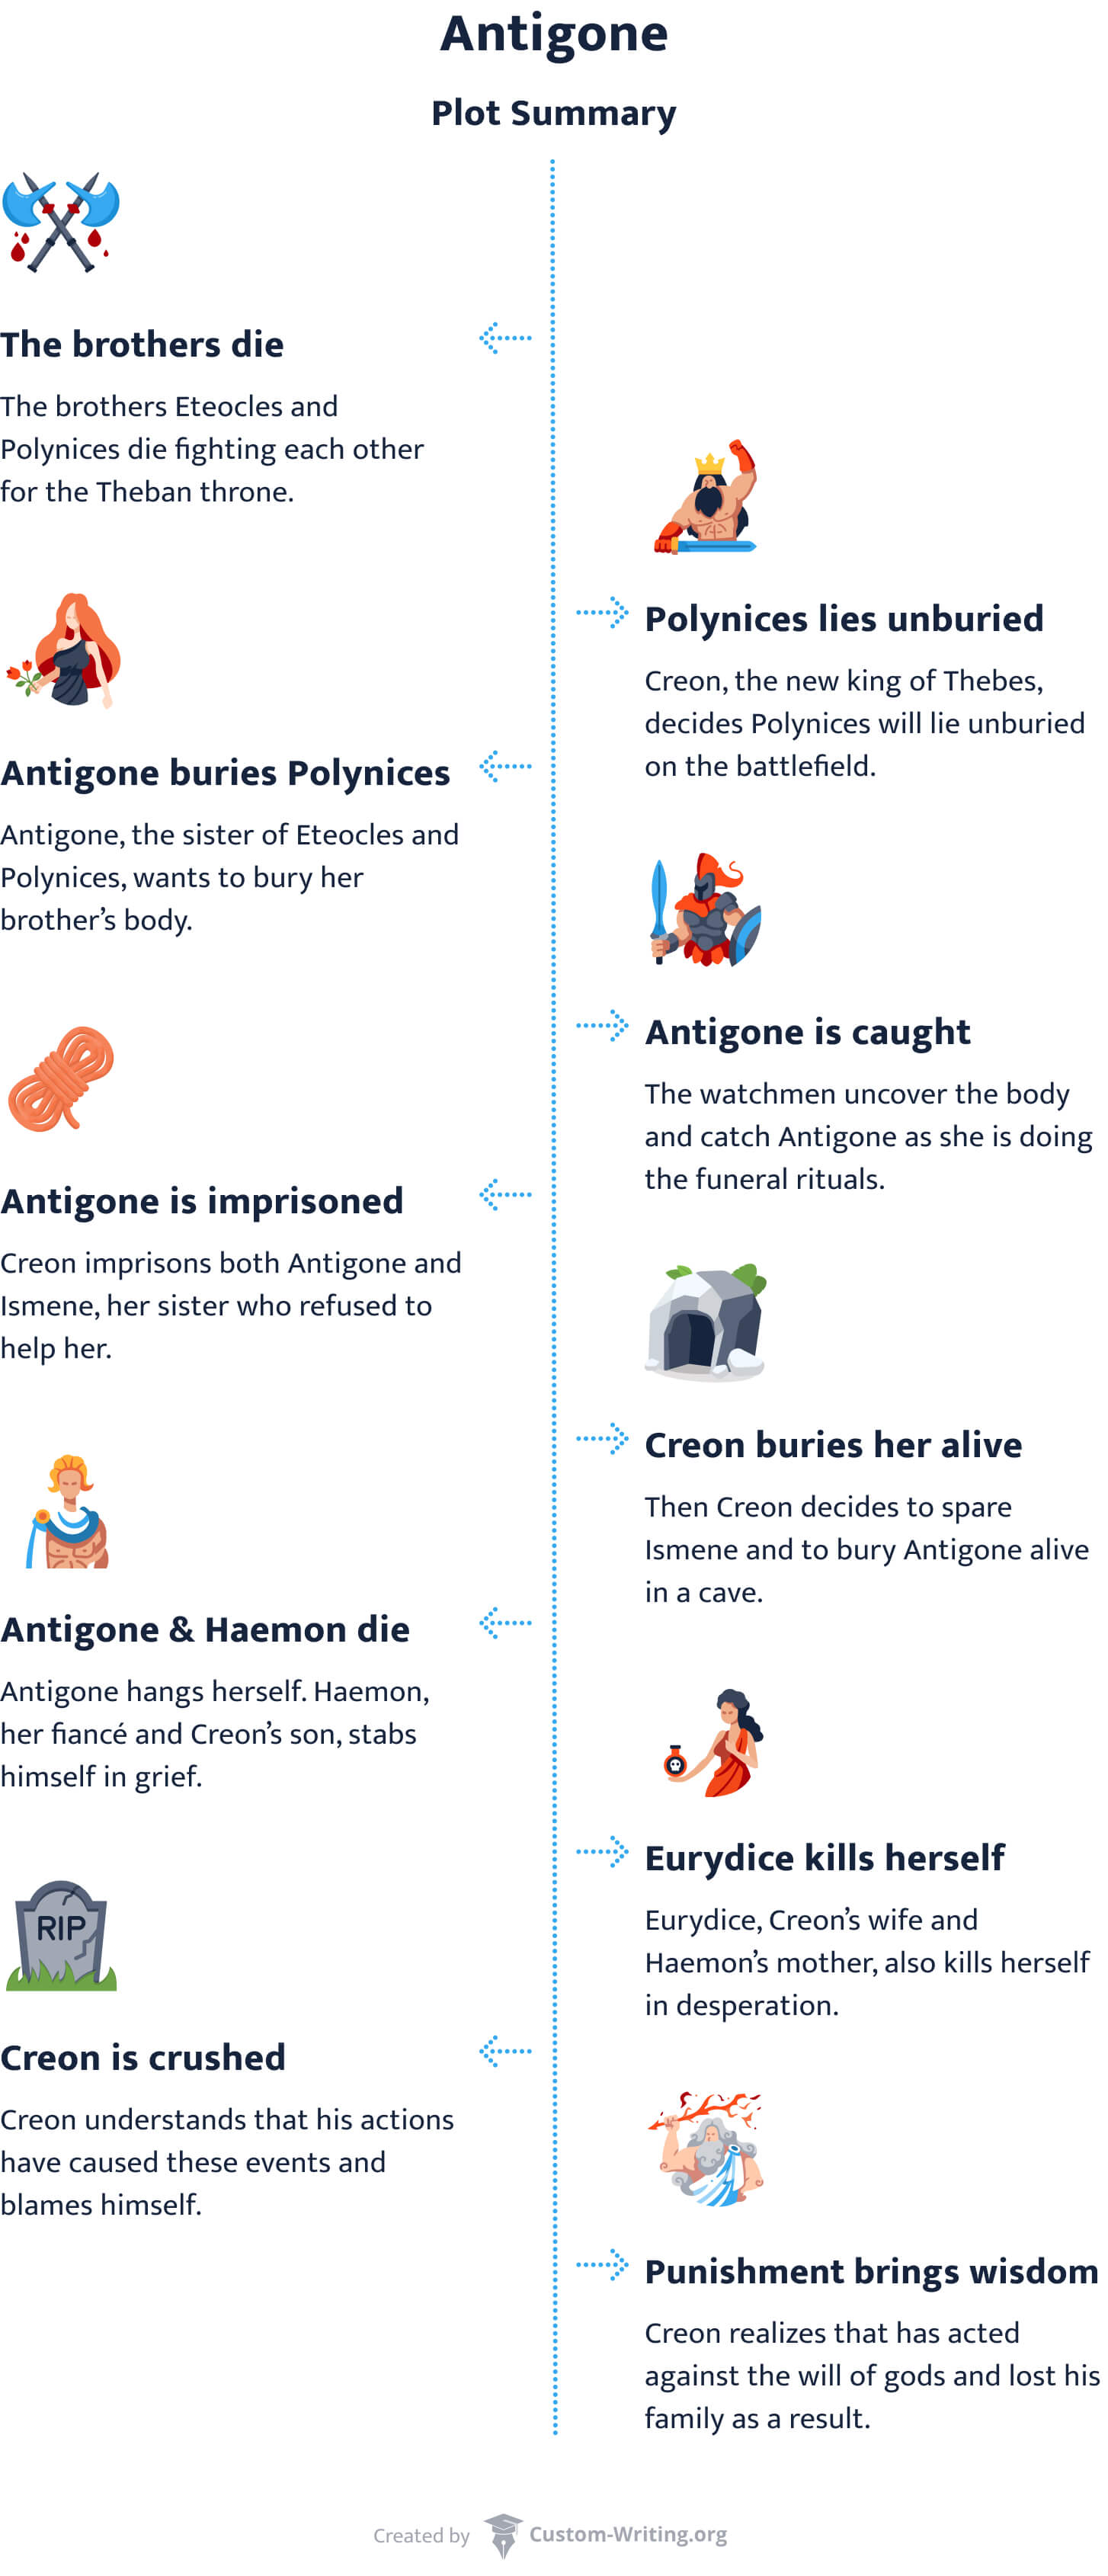 This illustrated summary of Antigone lists all the key events in the play's plot. 